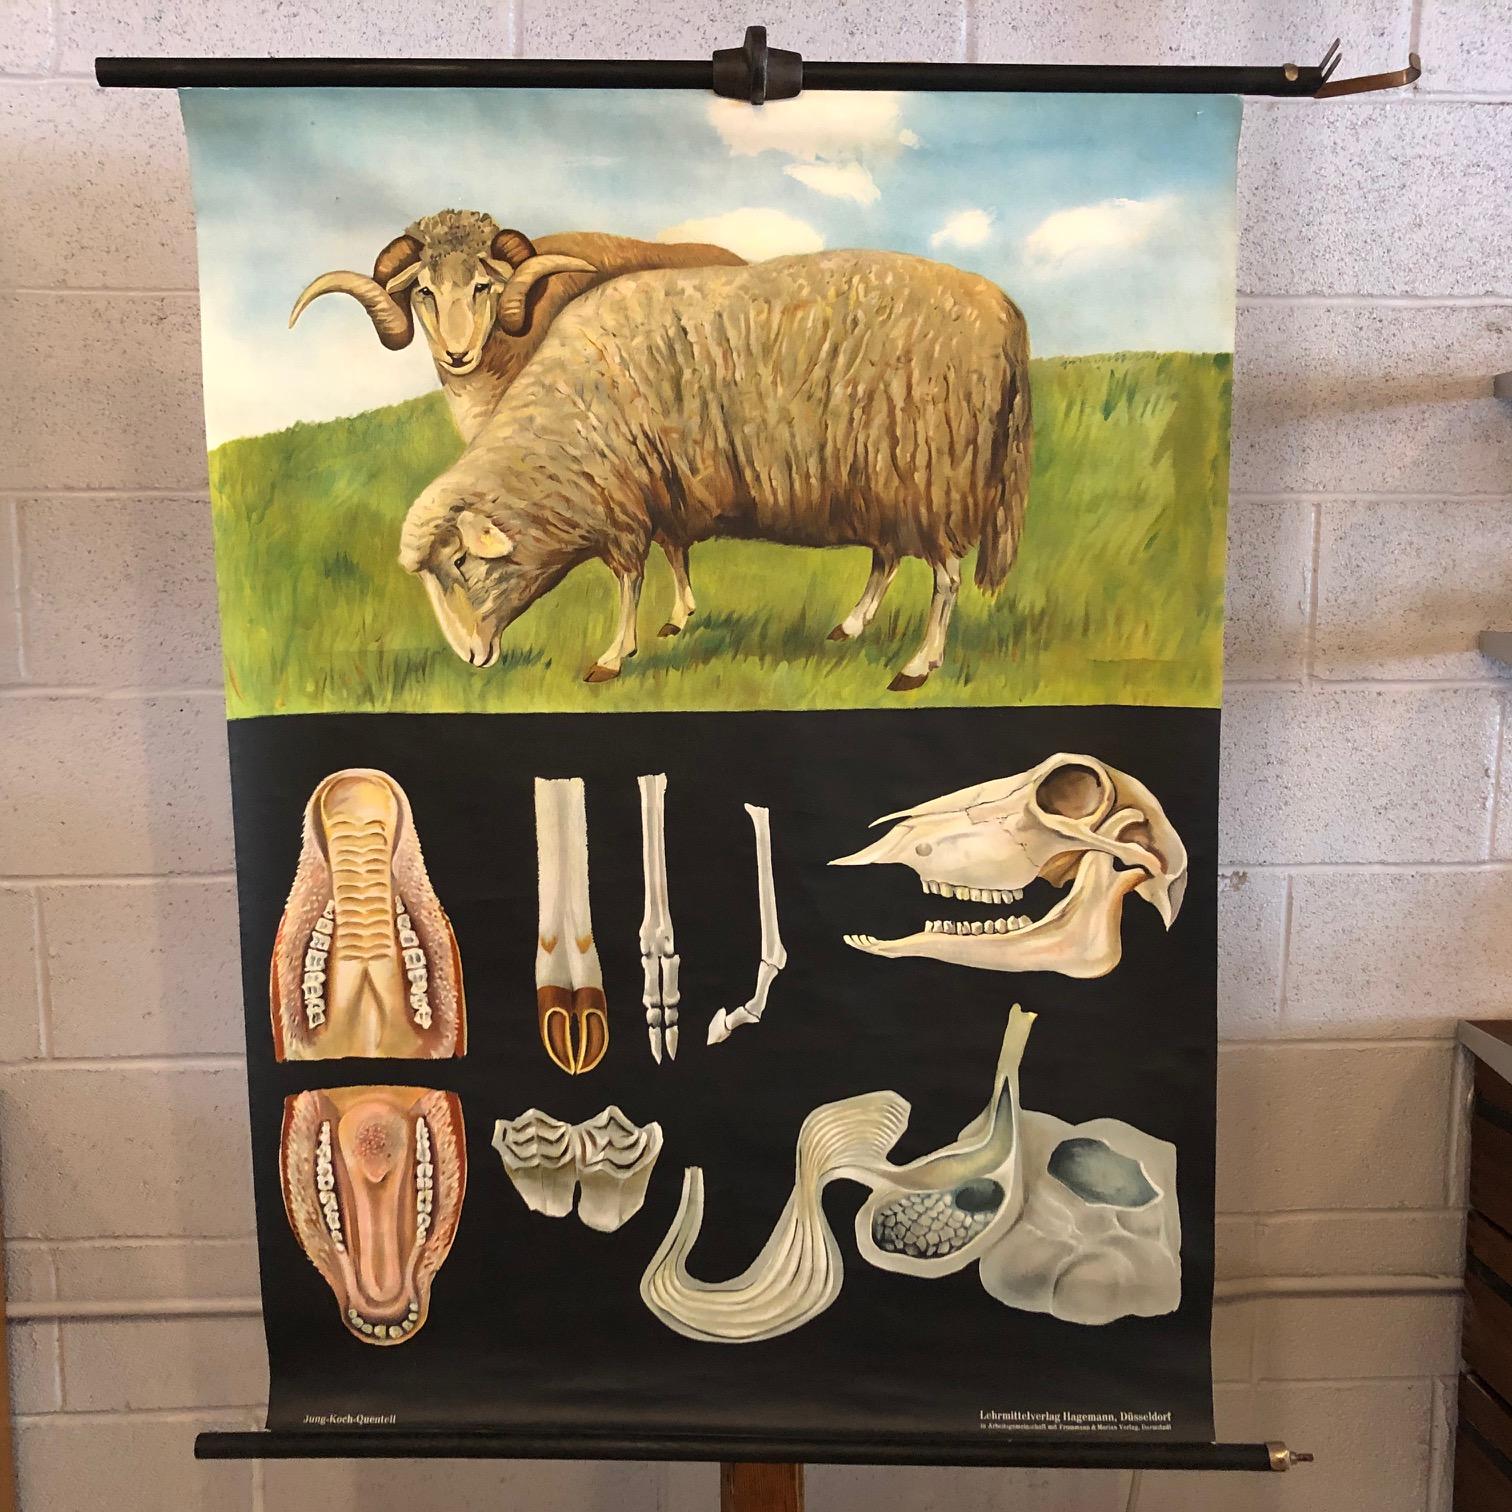 German, educational, zoological, roll-up chart depicting the anatomy of sheep/Ovis Aries by Jung-Koch-Quentell, Lehrmittelverlag Hagemann - Hadü Lehrmittel Düsseldorf is printed on canvas backed paper on painted maple dowels with steel vertical